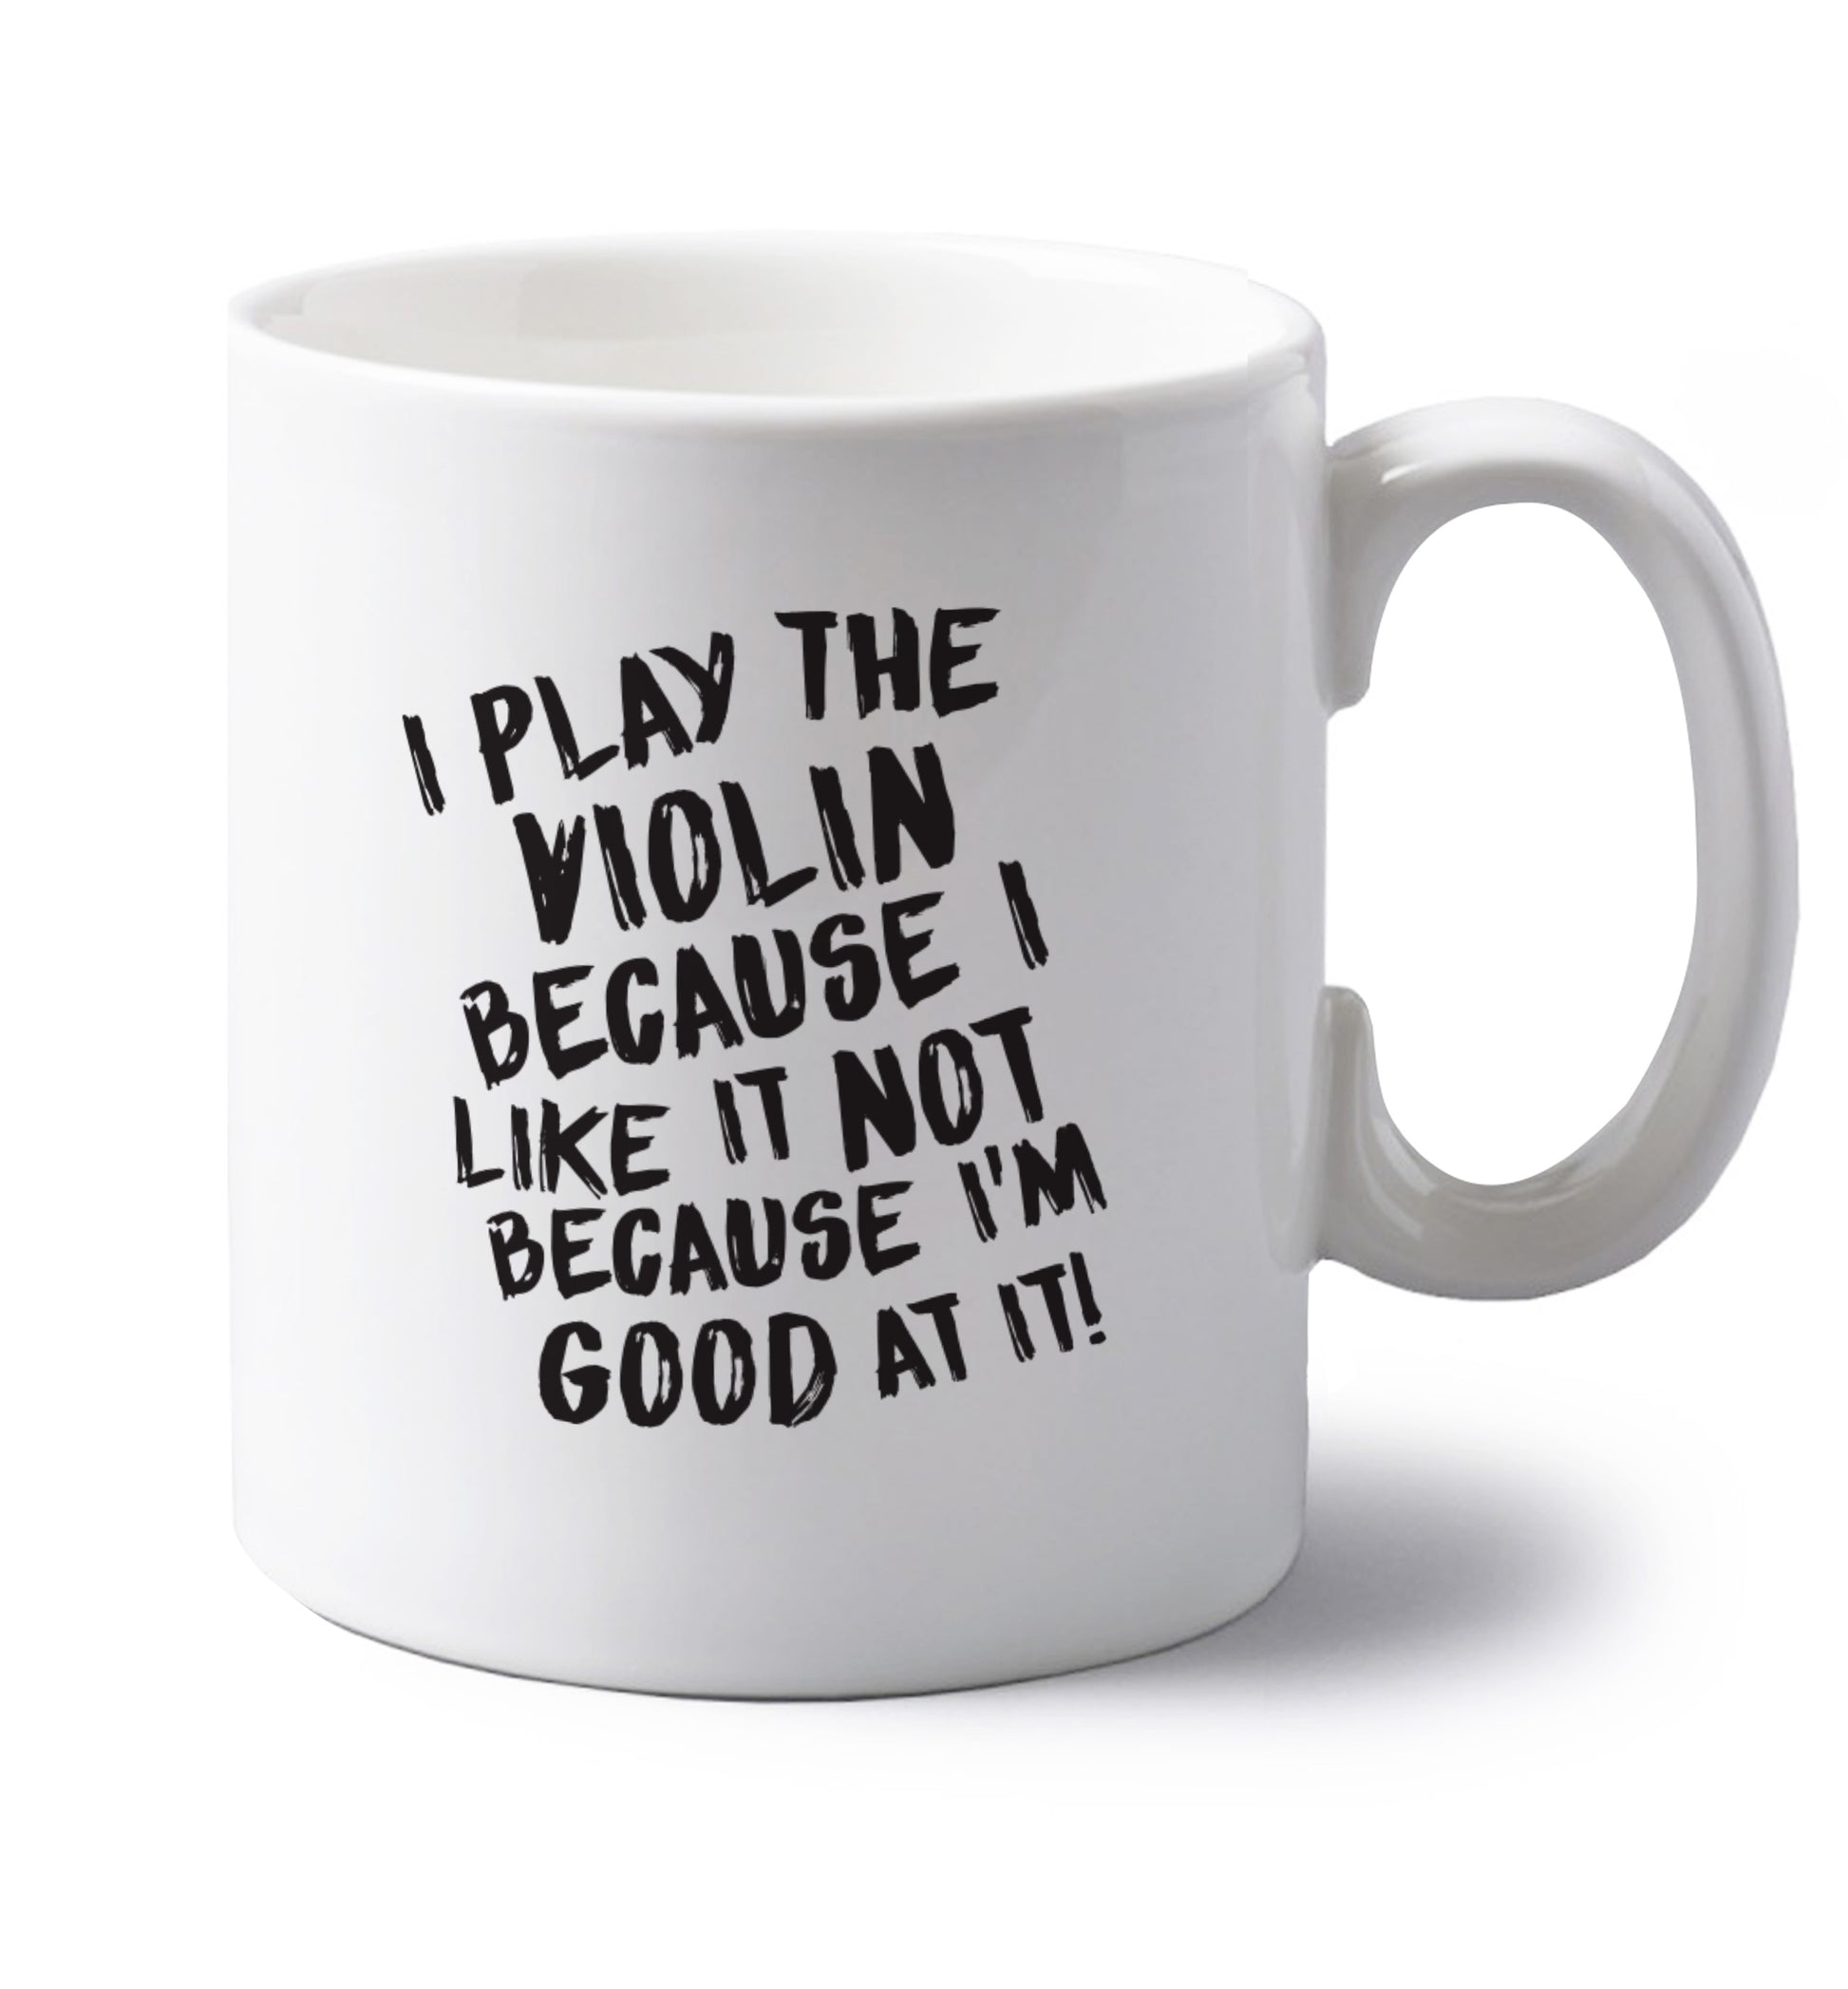 I play the violin because I like it not because I'm good at it left handed white ceramic mug 